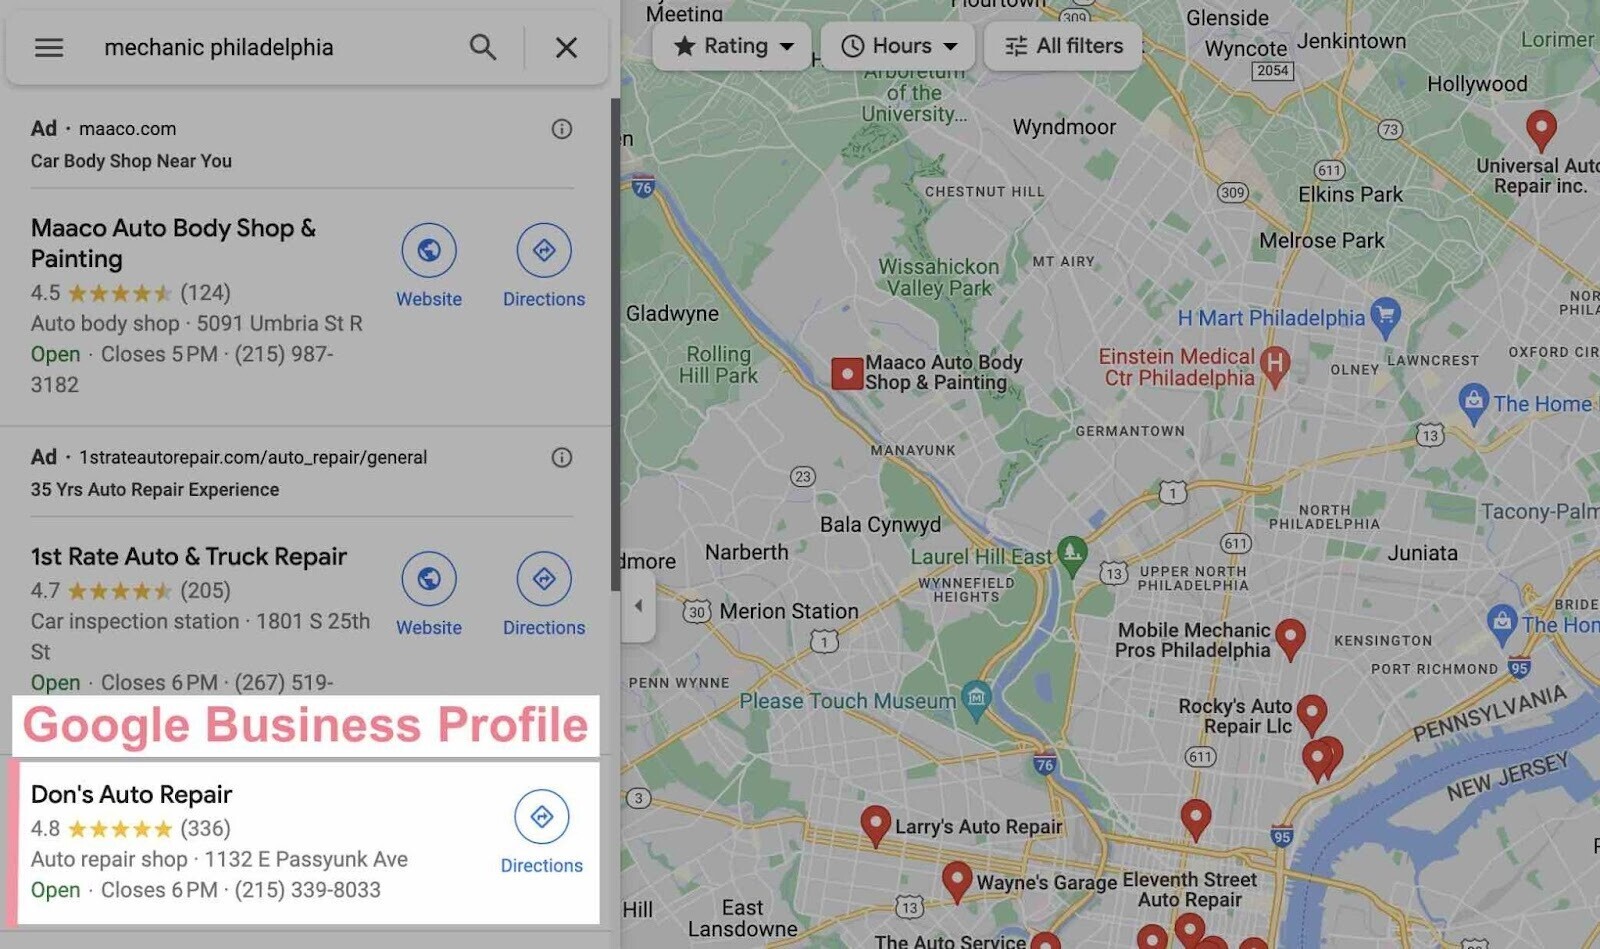 Google Business Profile in maps